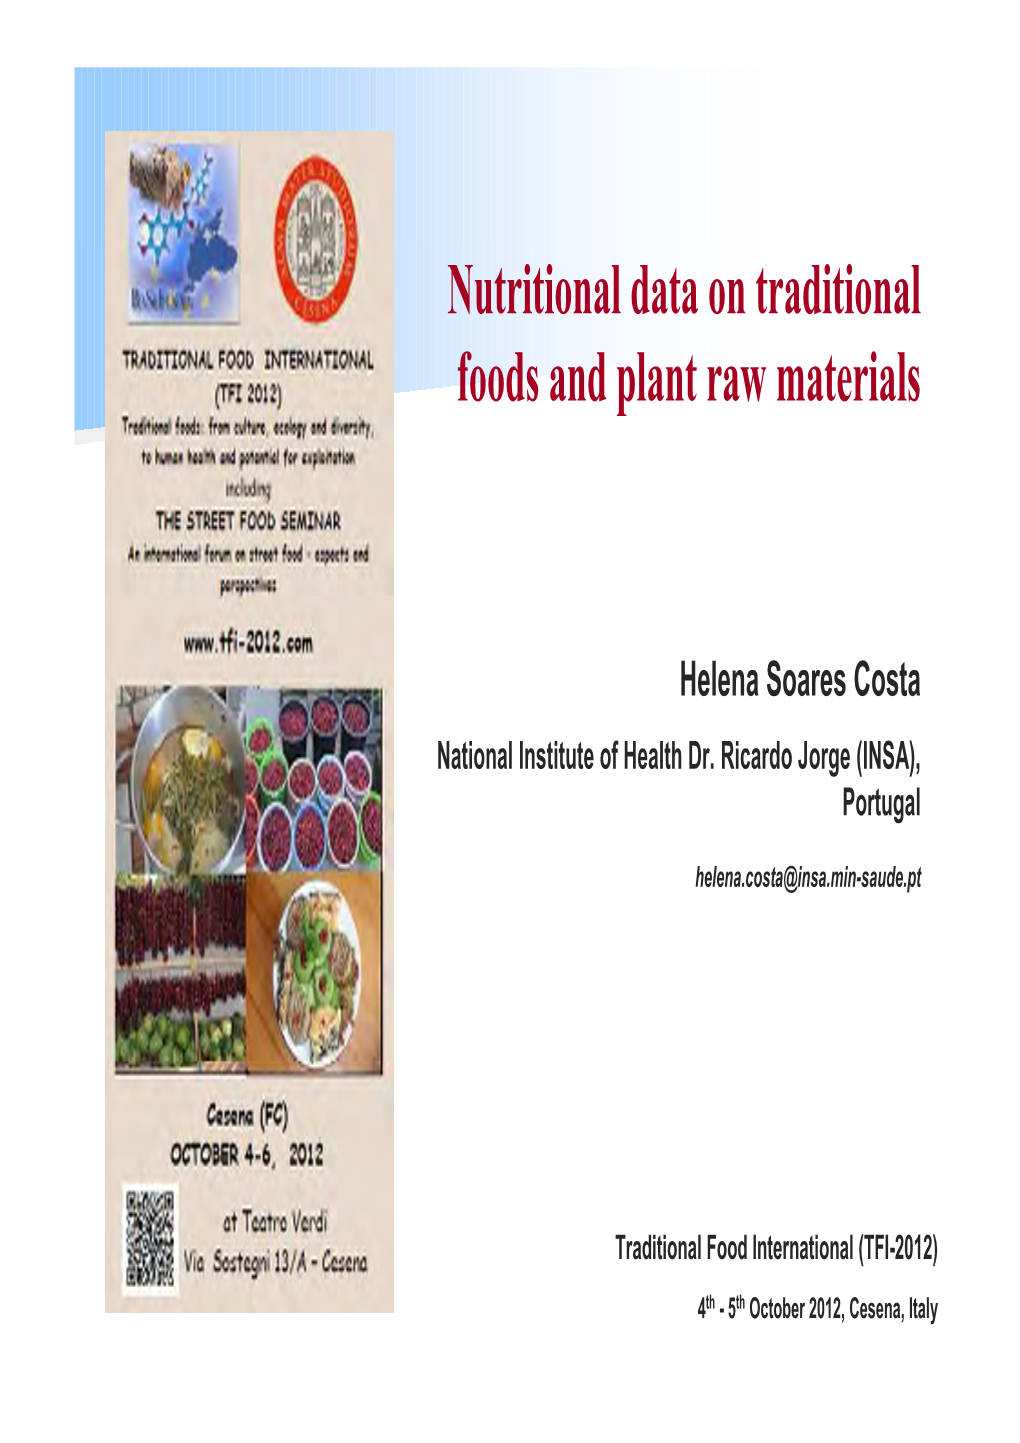 Nutritional Data on Traditional Foods and Analytical Data Of